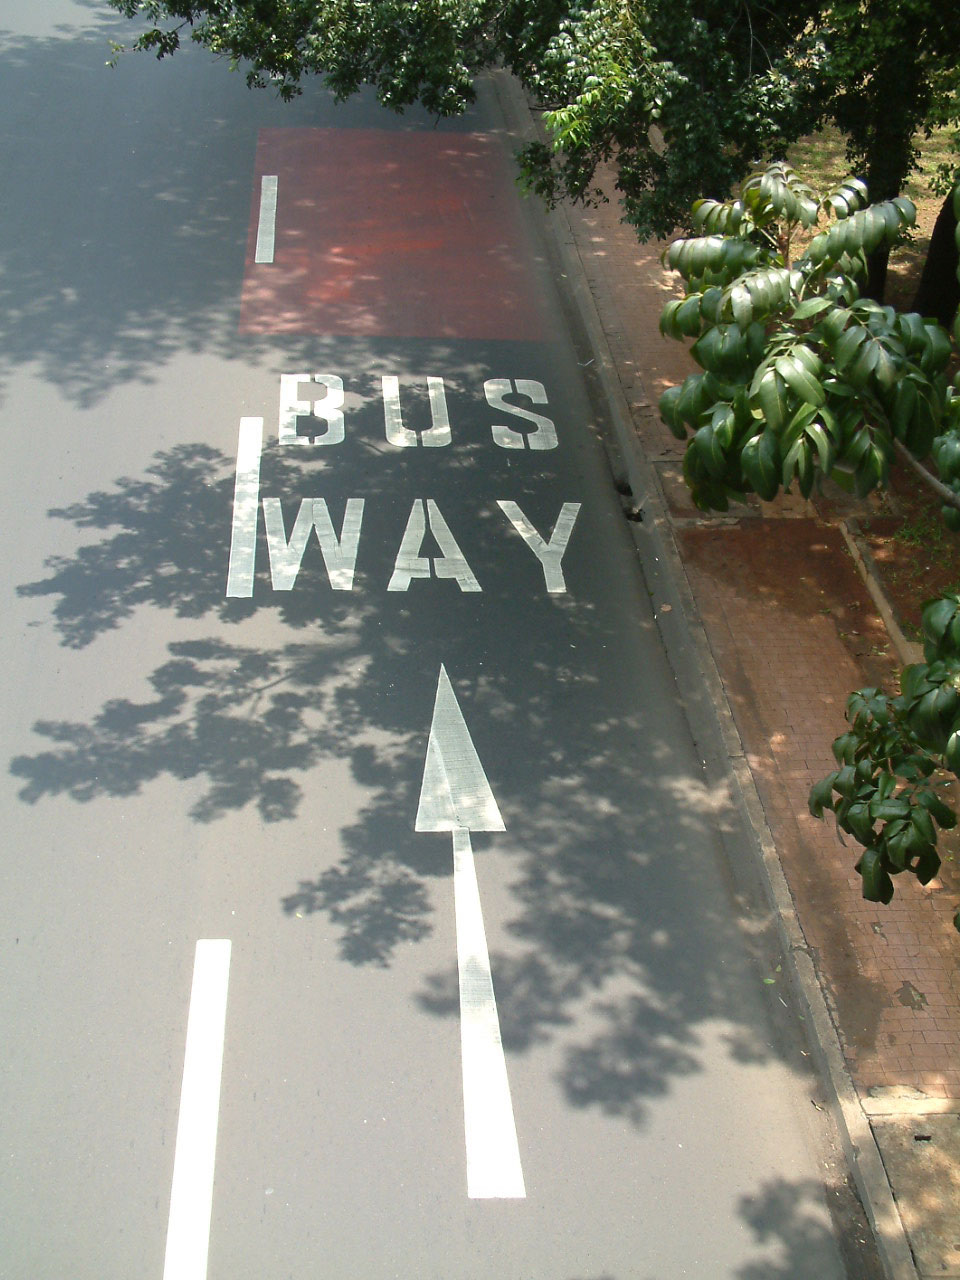 Fig. 22.37 Painted information employing a bus-only approach is also an option, as shown here from an example in Jakarta, Indonesia.